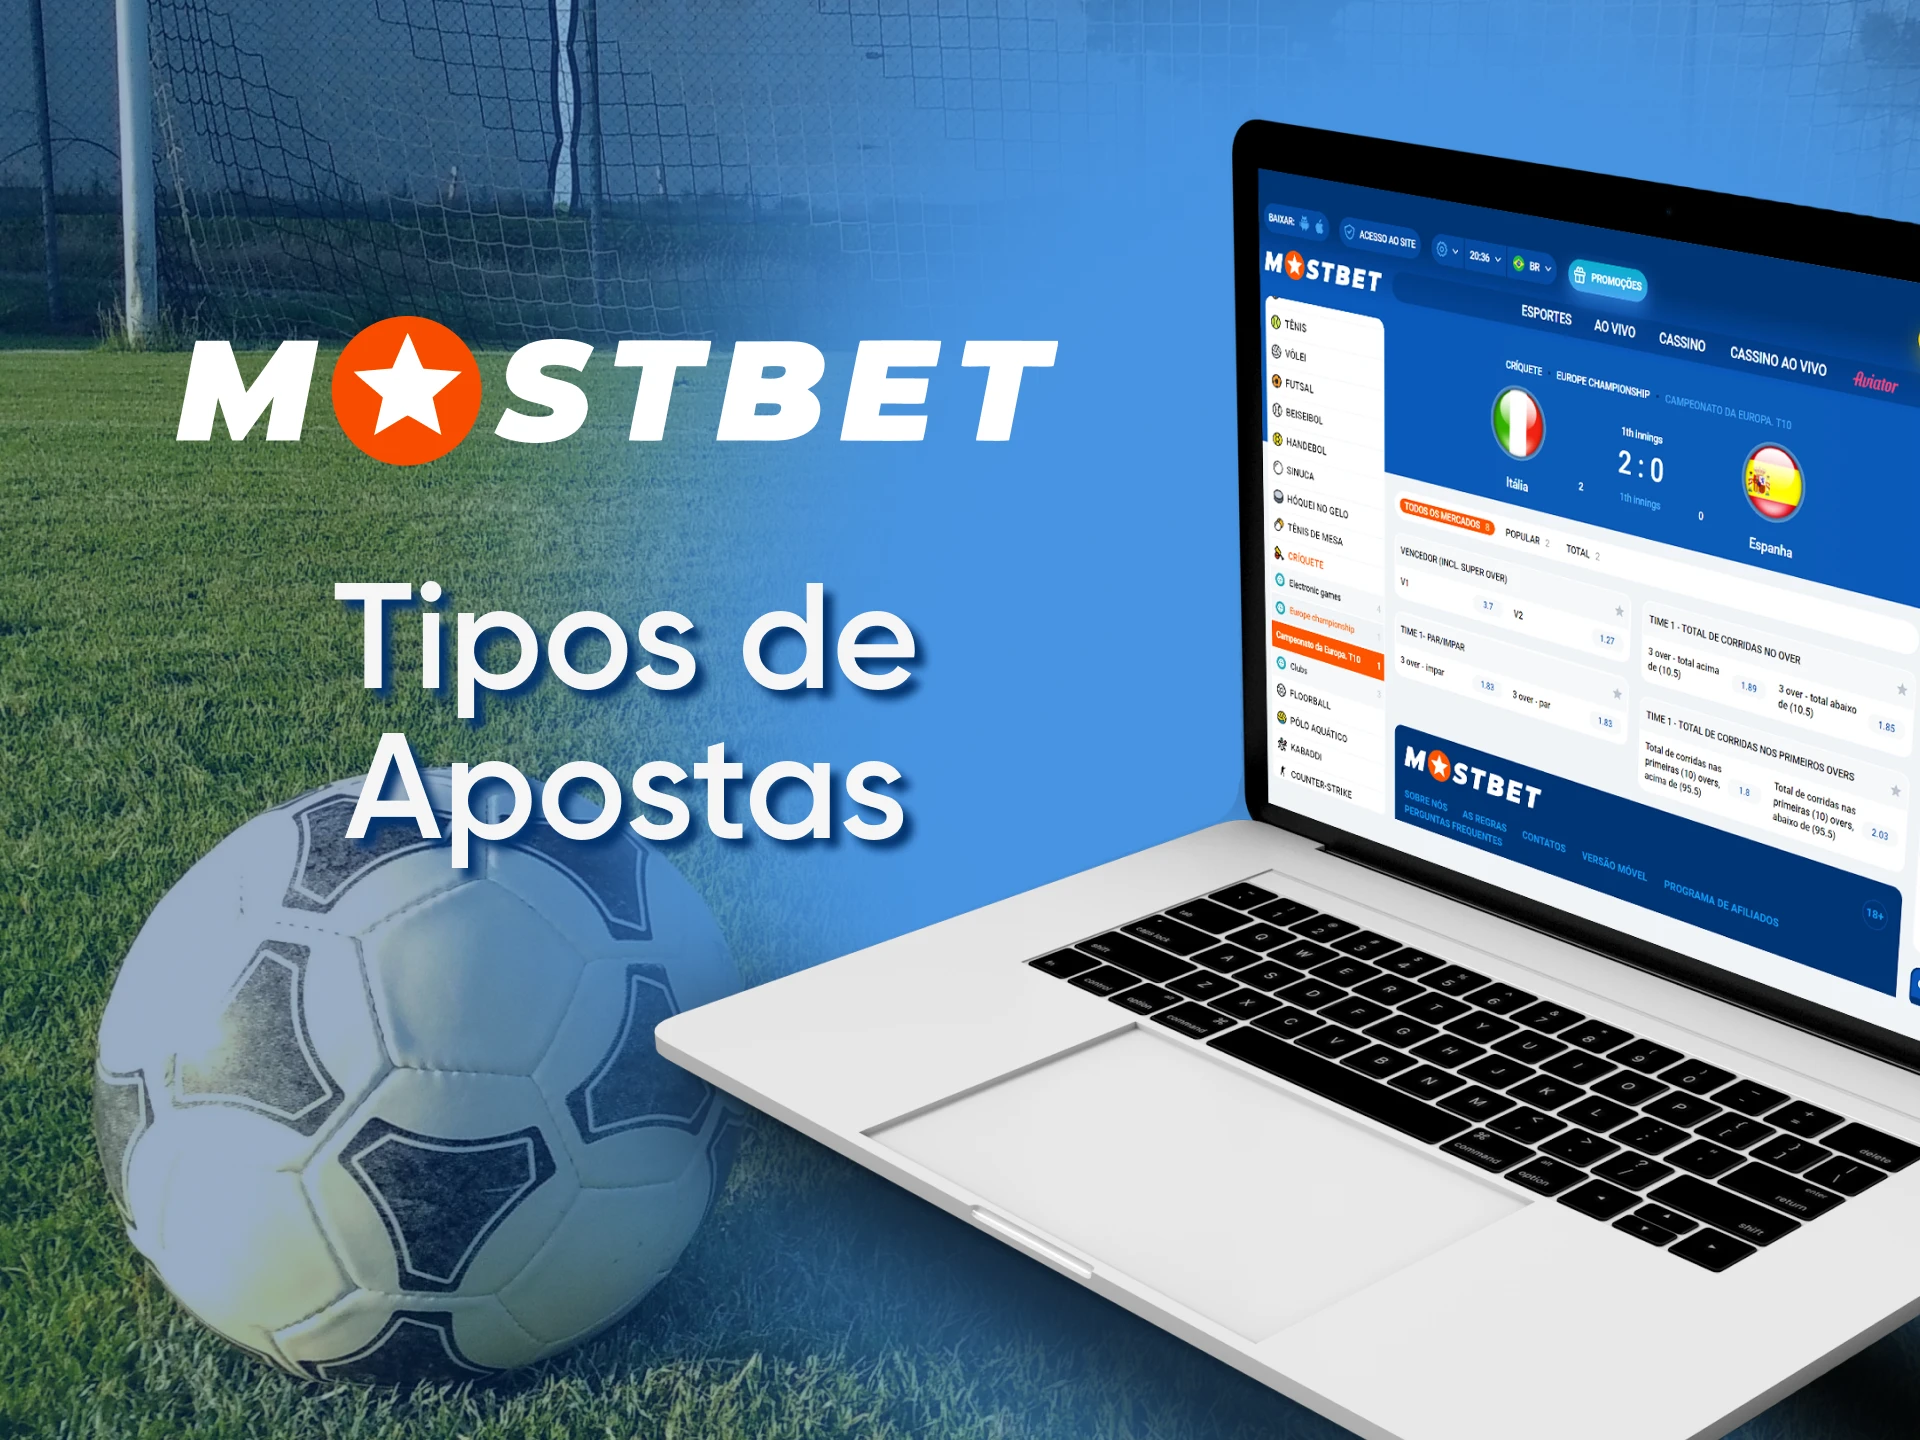 Choose different types of bets with Mostbet.